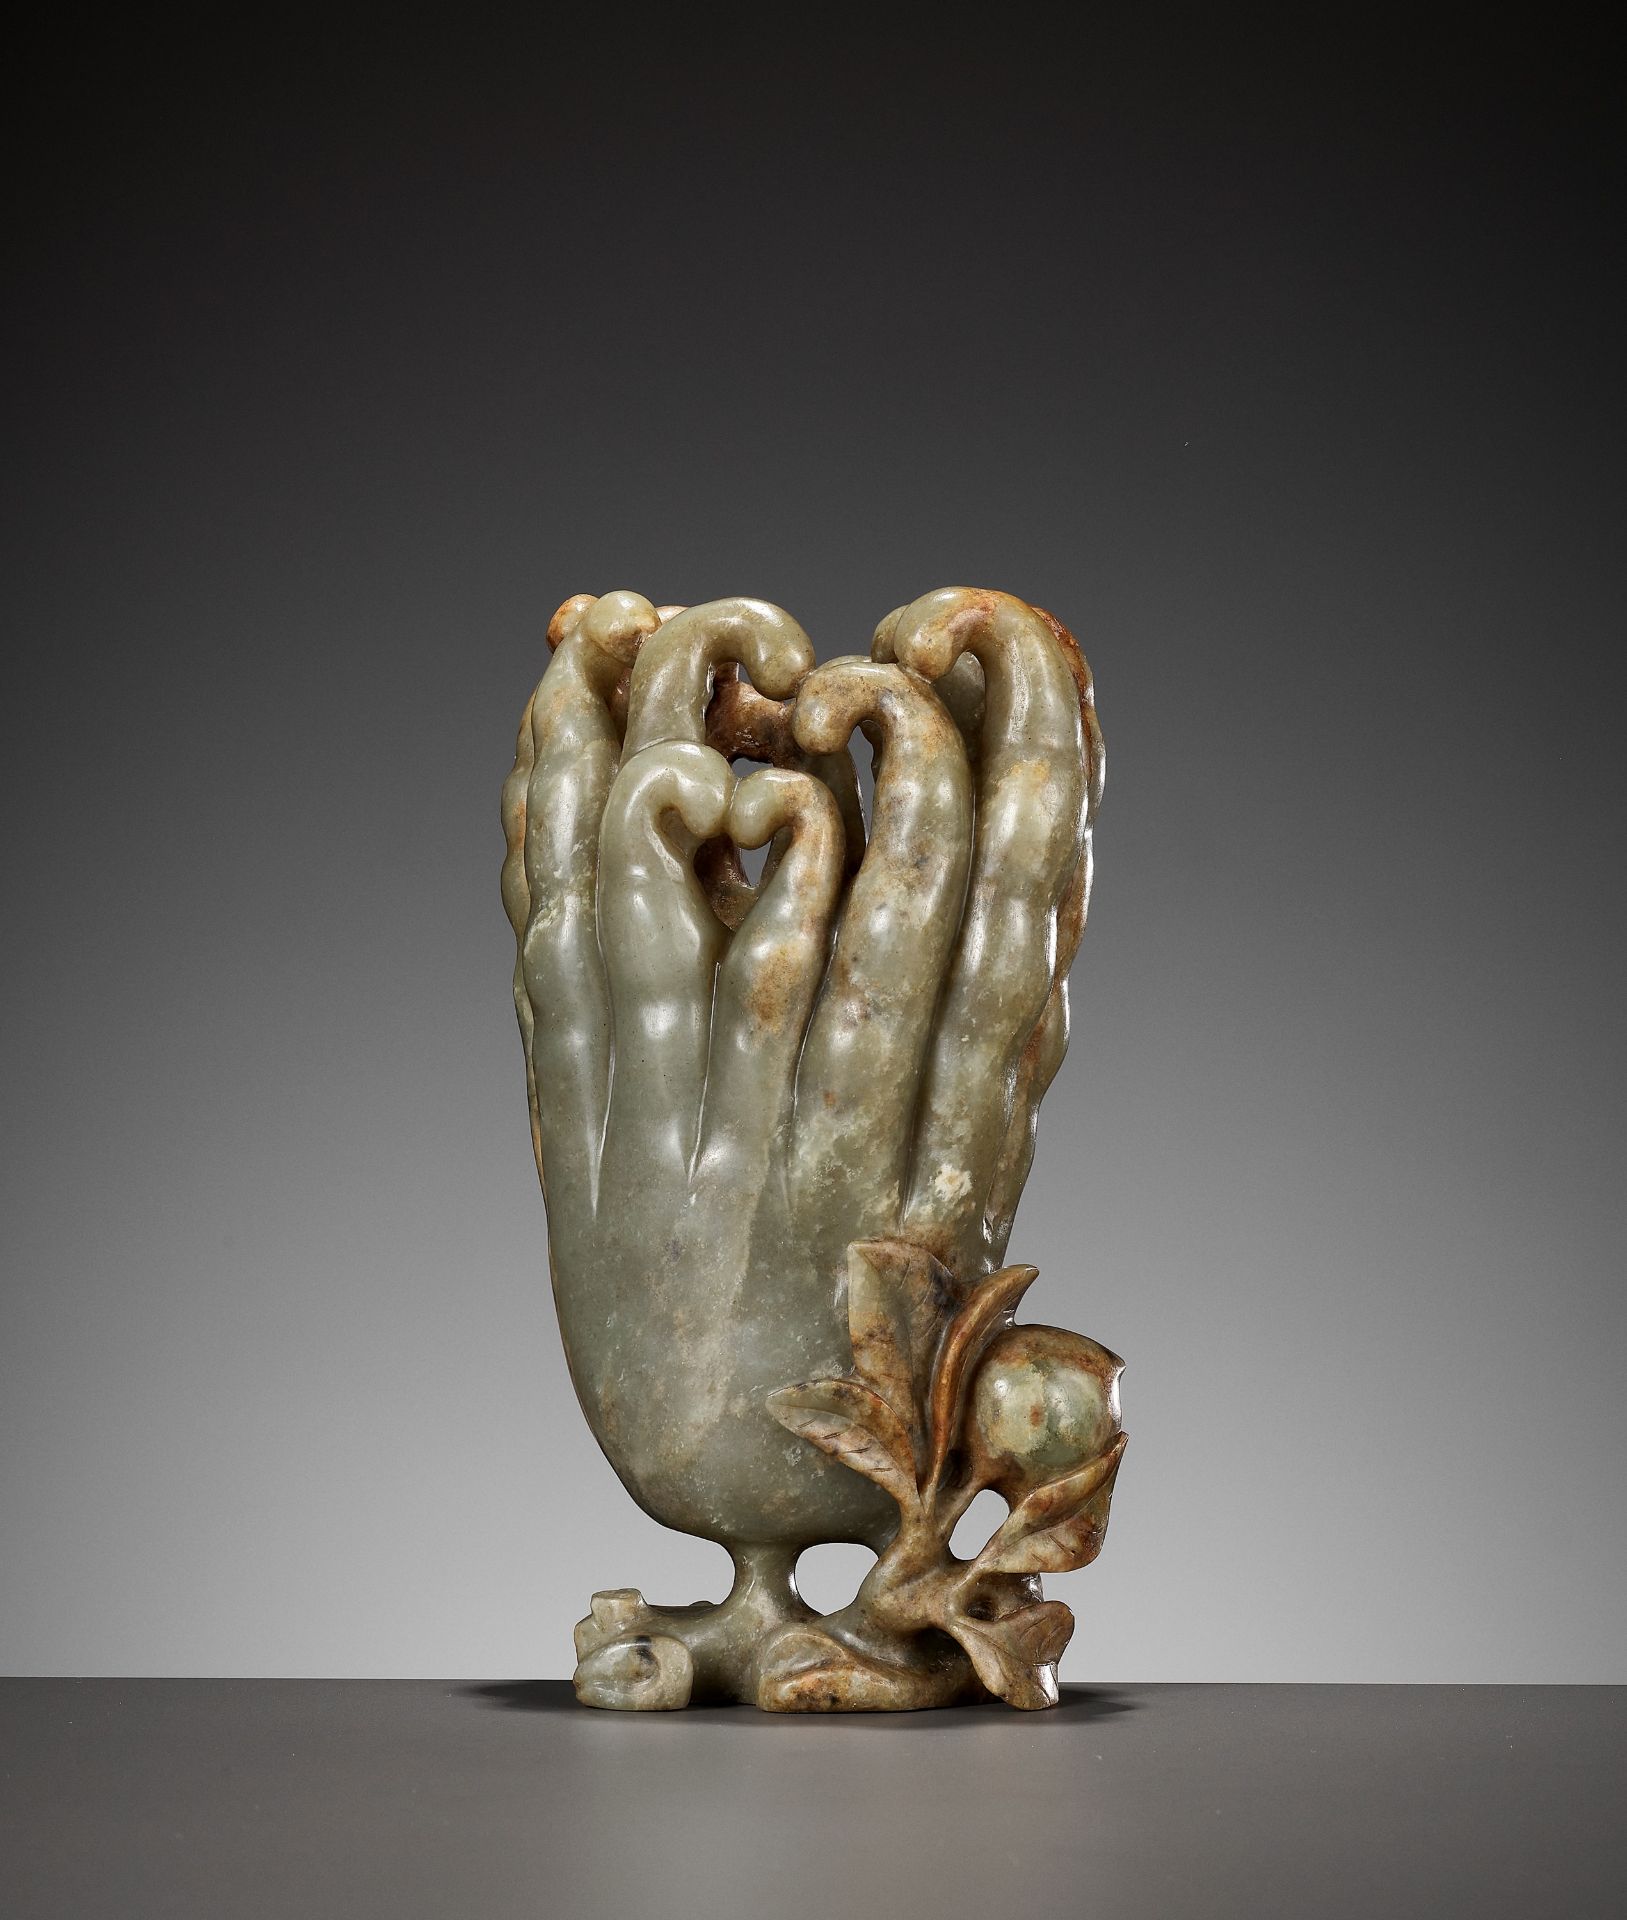 A CELADON AND RUSSET JADE 'FINGER CITRON' VASE, 17TH - 18TH CENTURY